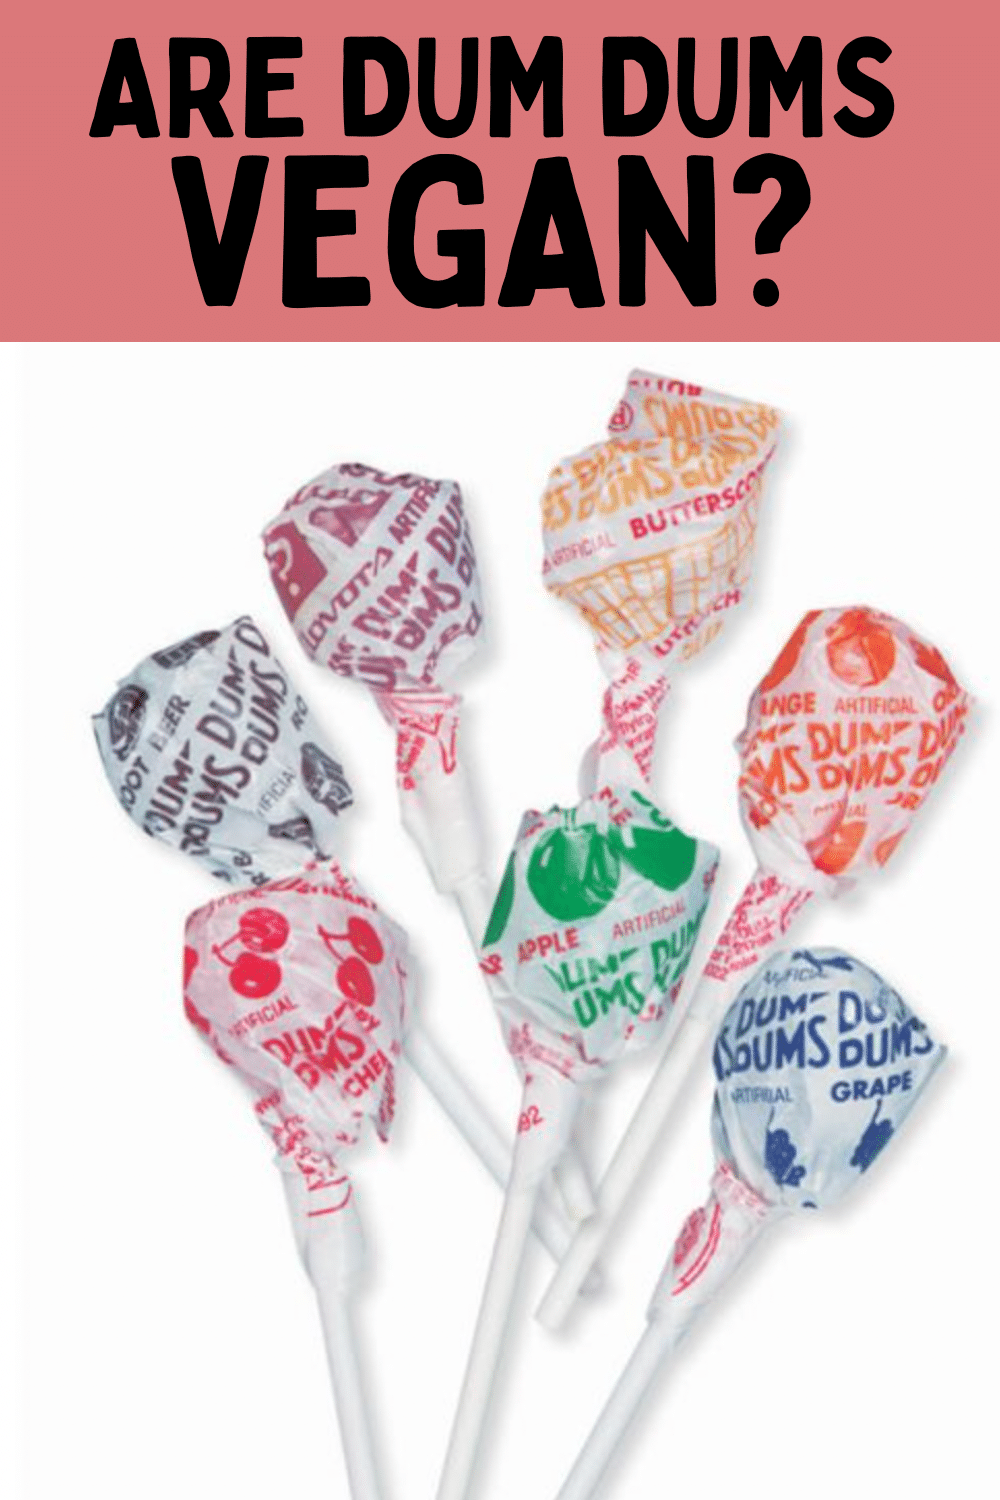 You want to know: are dum dums vegan? We have all the details in this post! We will answer all your questions about dum dums being vegan or not.